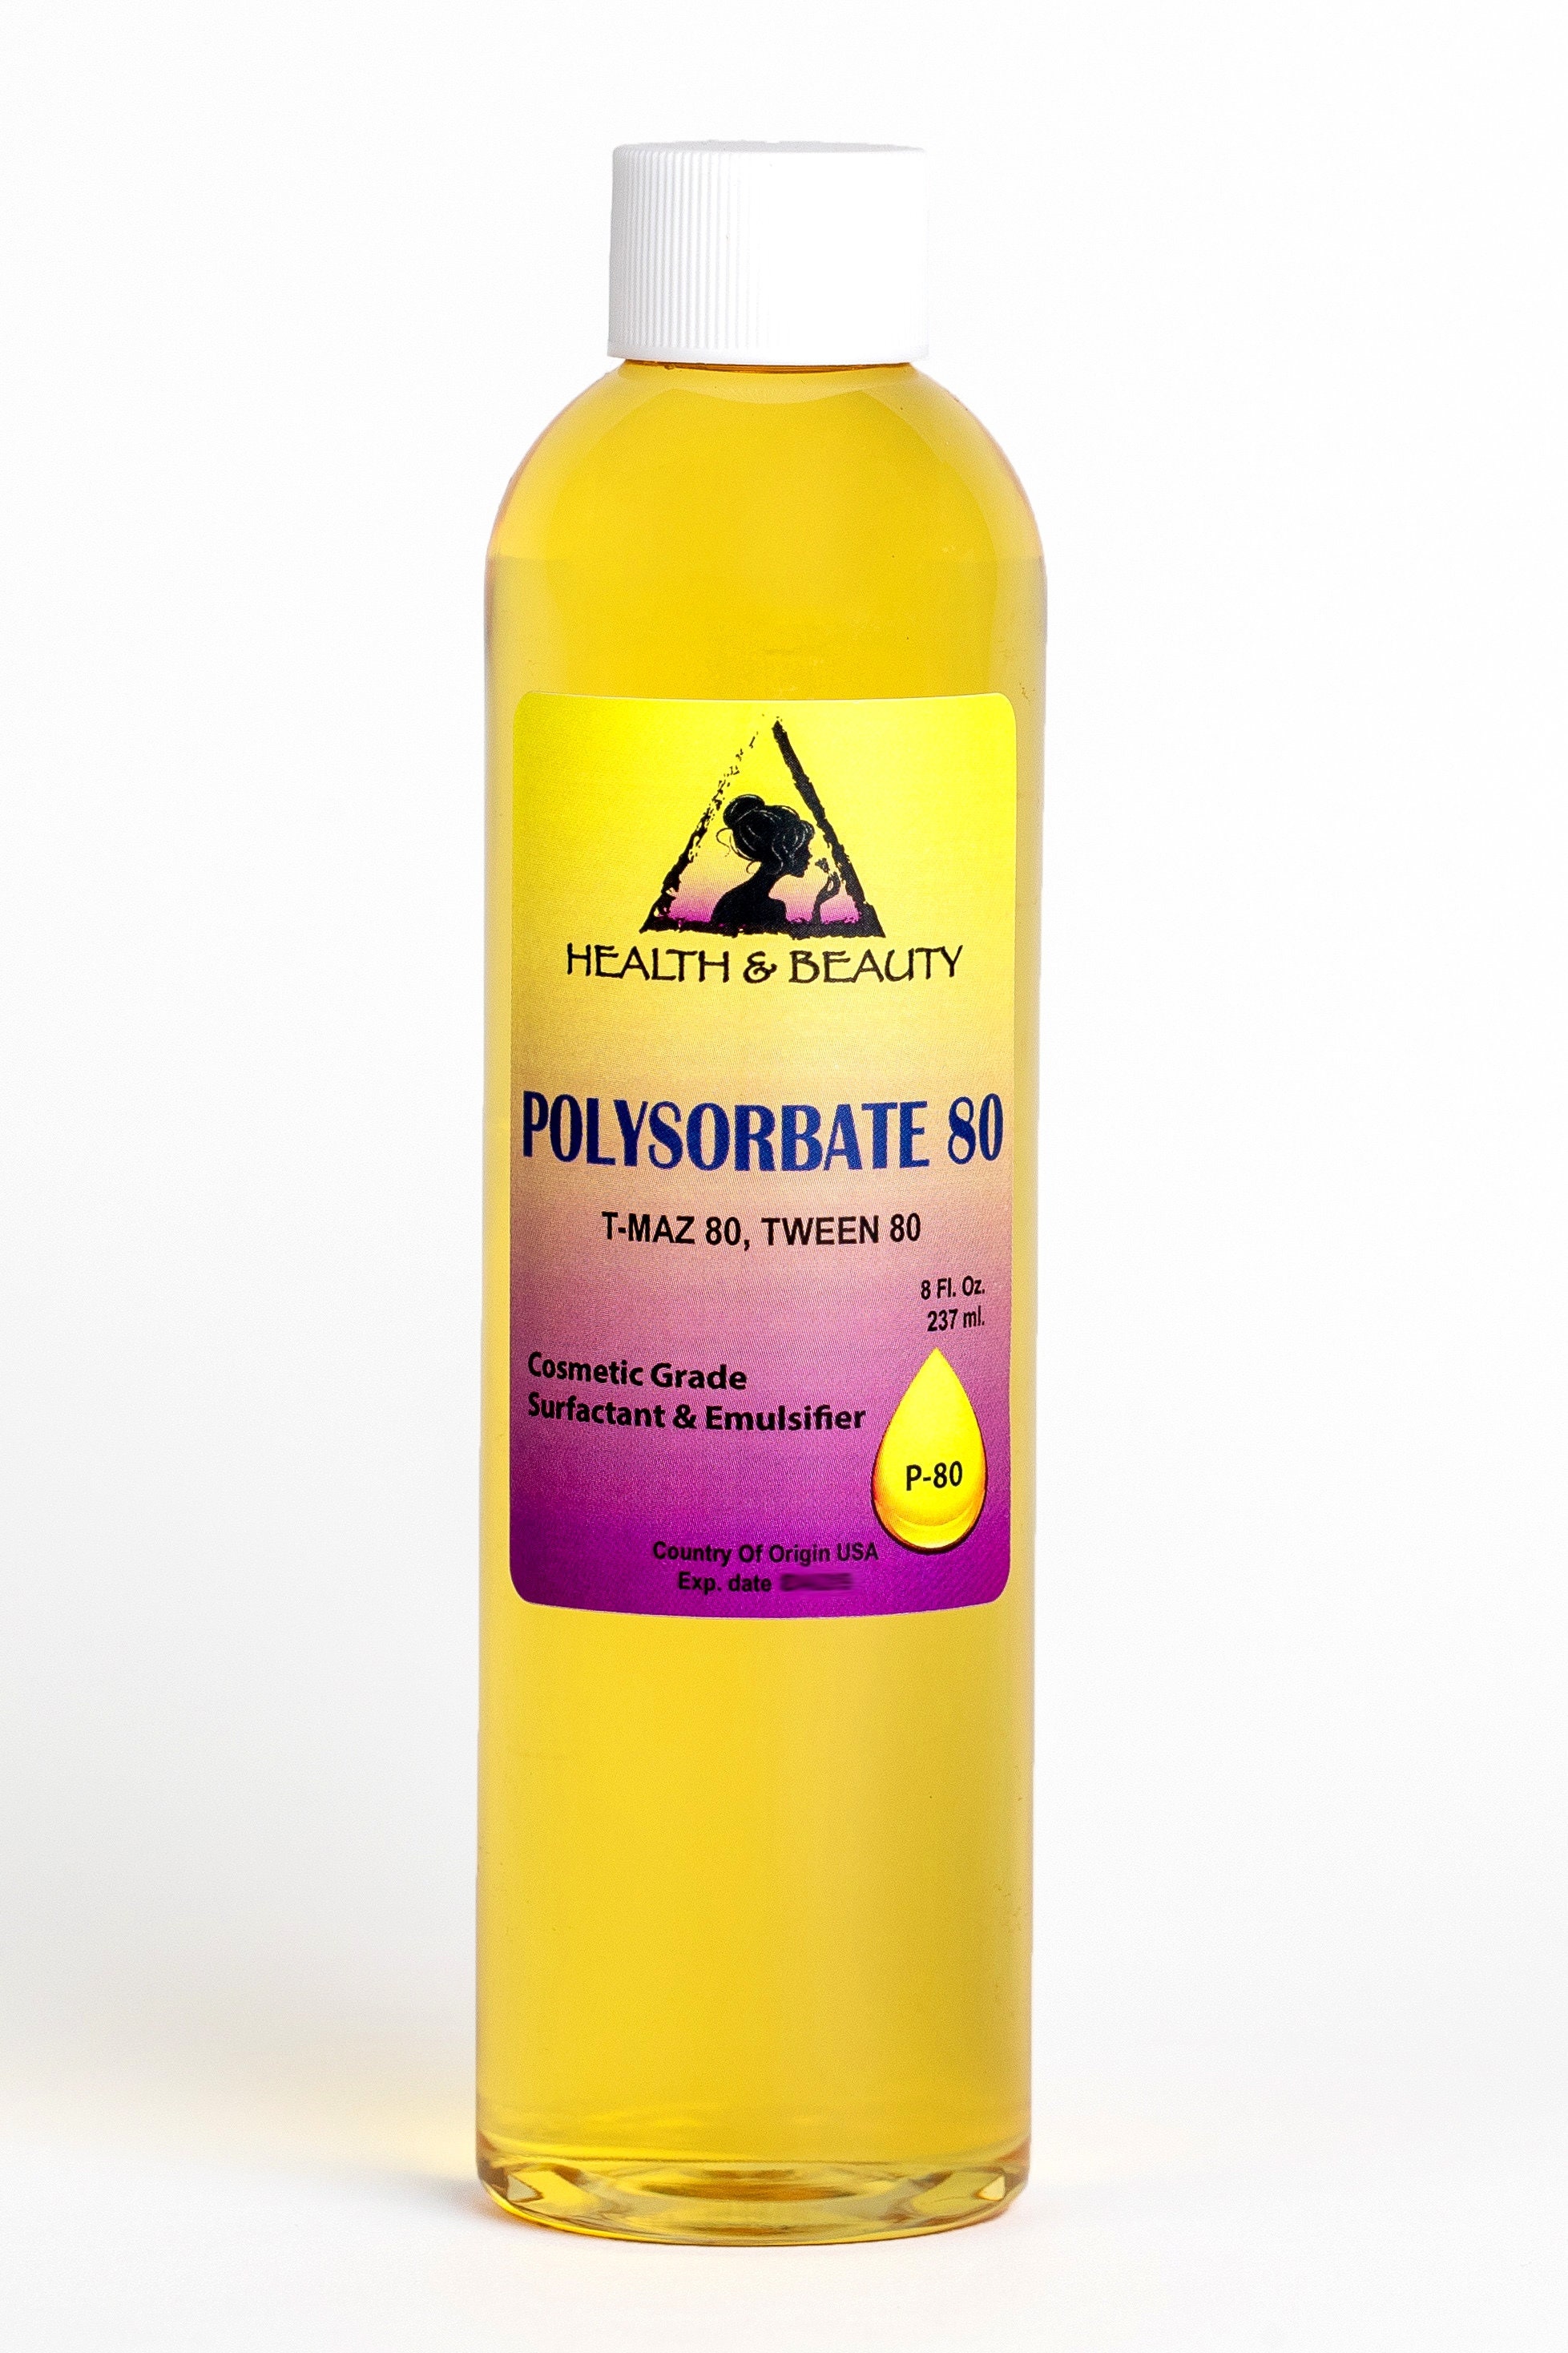 Polysorbate 80 in bath bombs - a complete guide - DIY Beauty Base